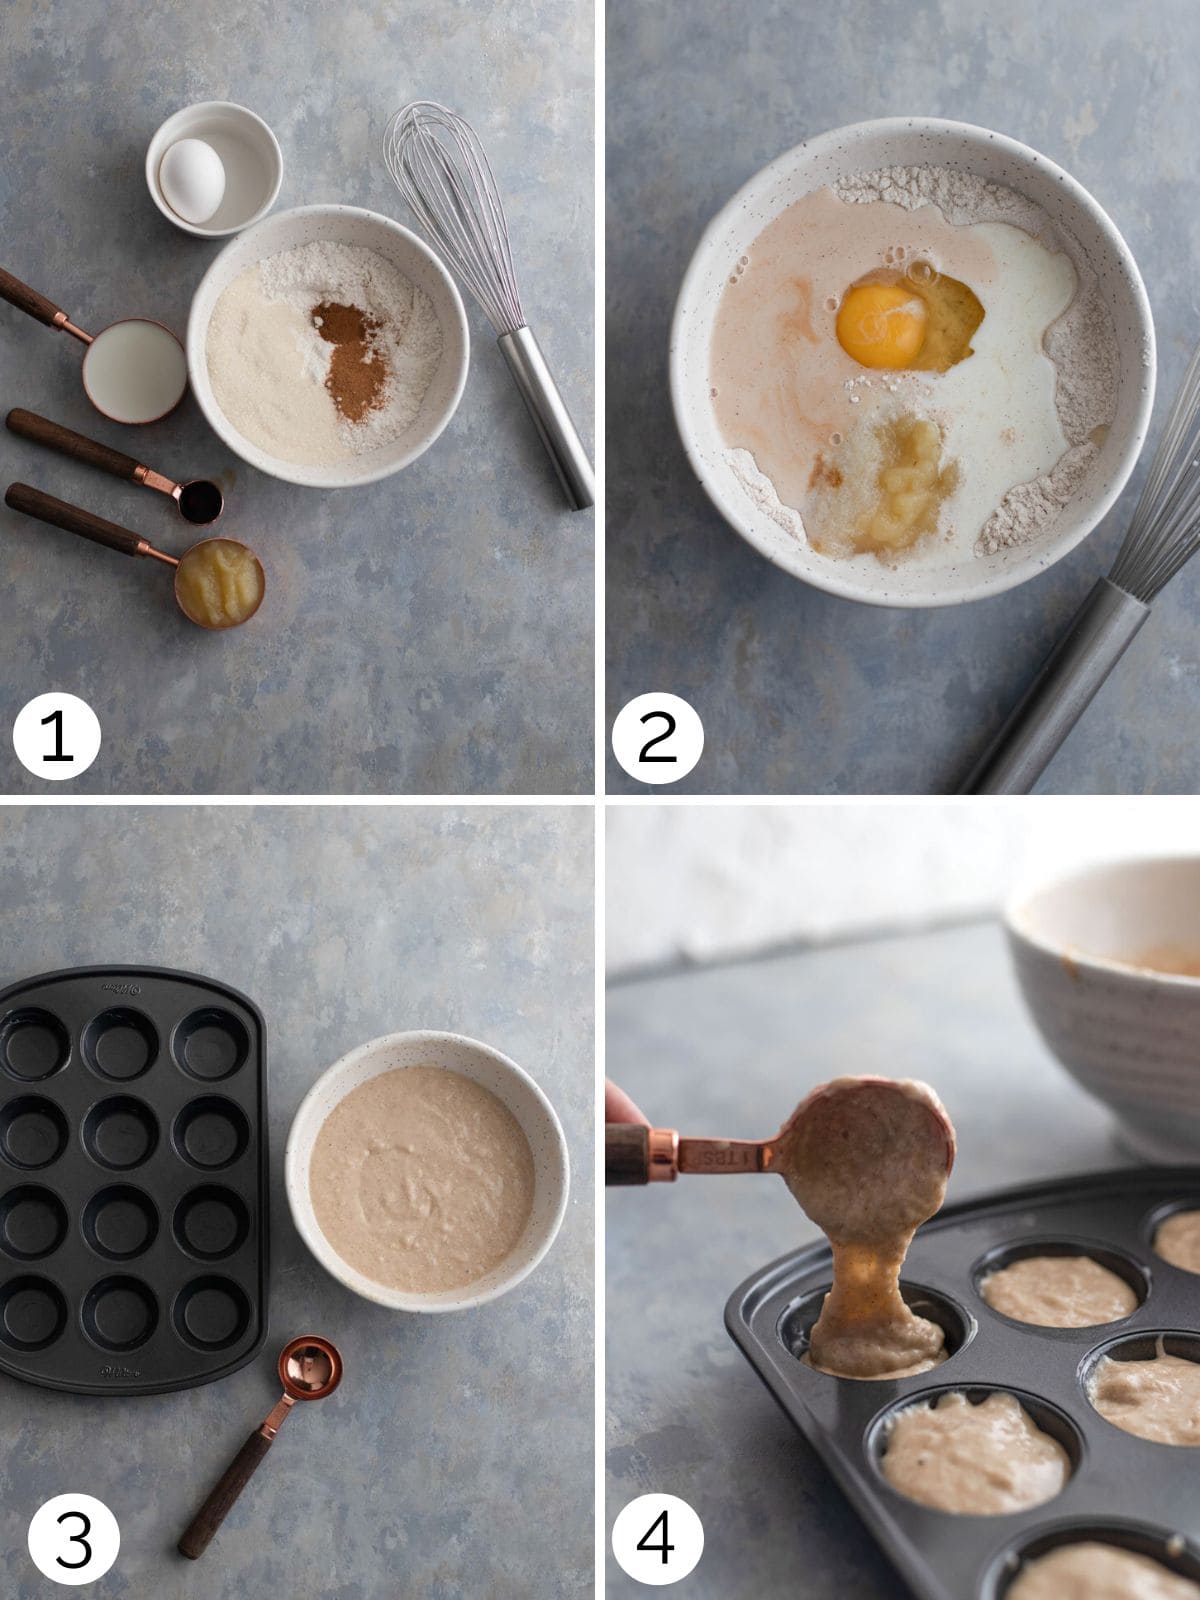 Step by step photos of making baked donut holes.